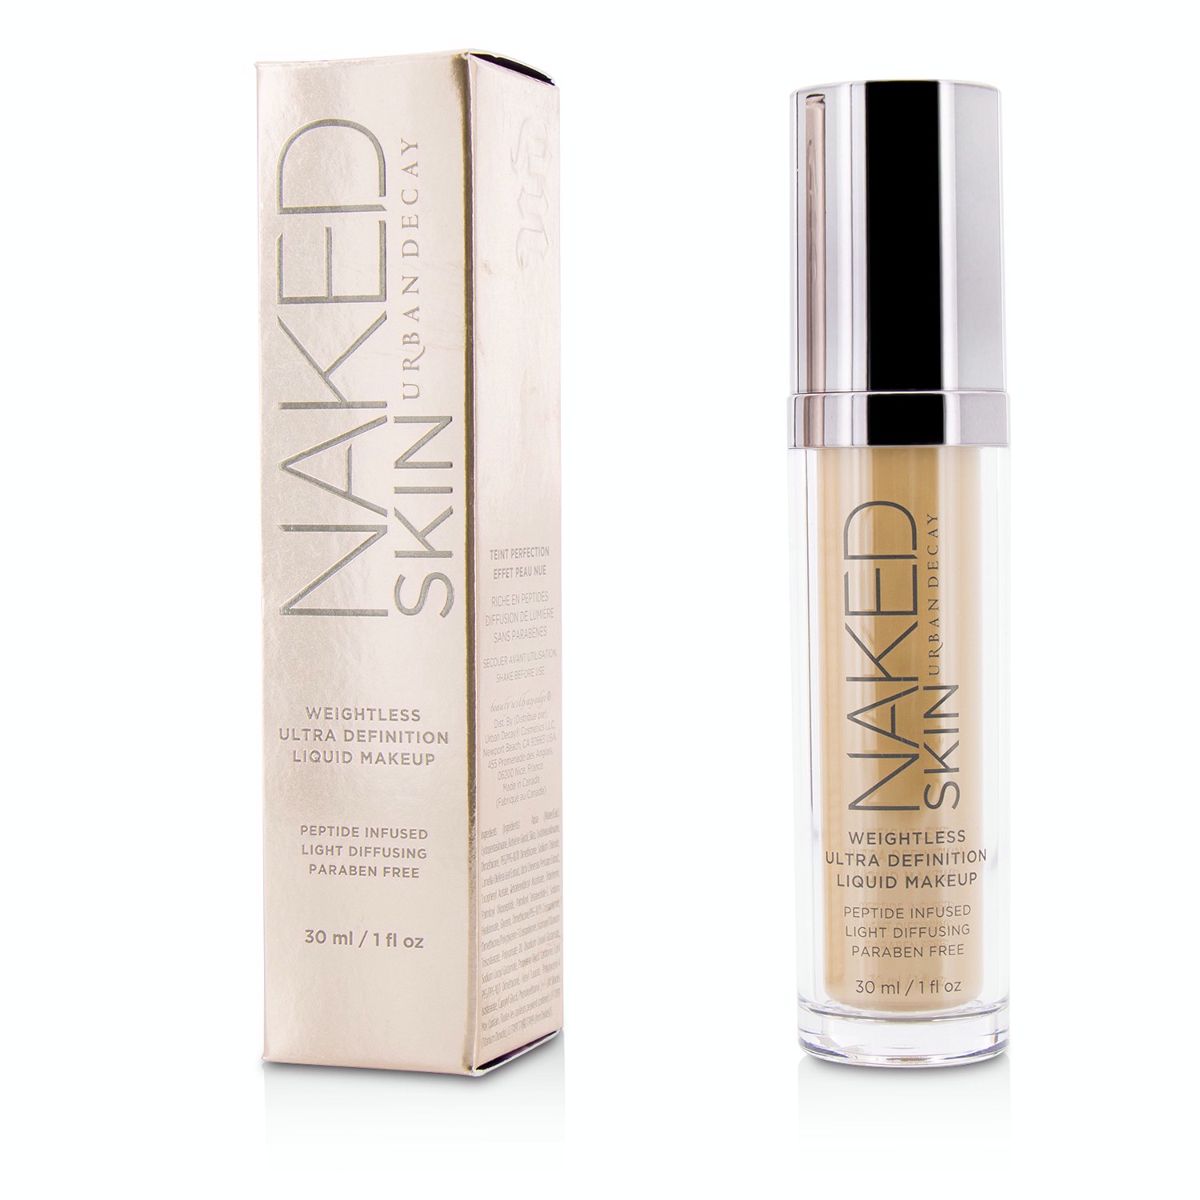 Naked Skin Weightless Ultra Definition Liquid Makeup - #3.5 Urban Decay Image